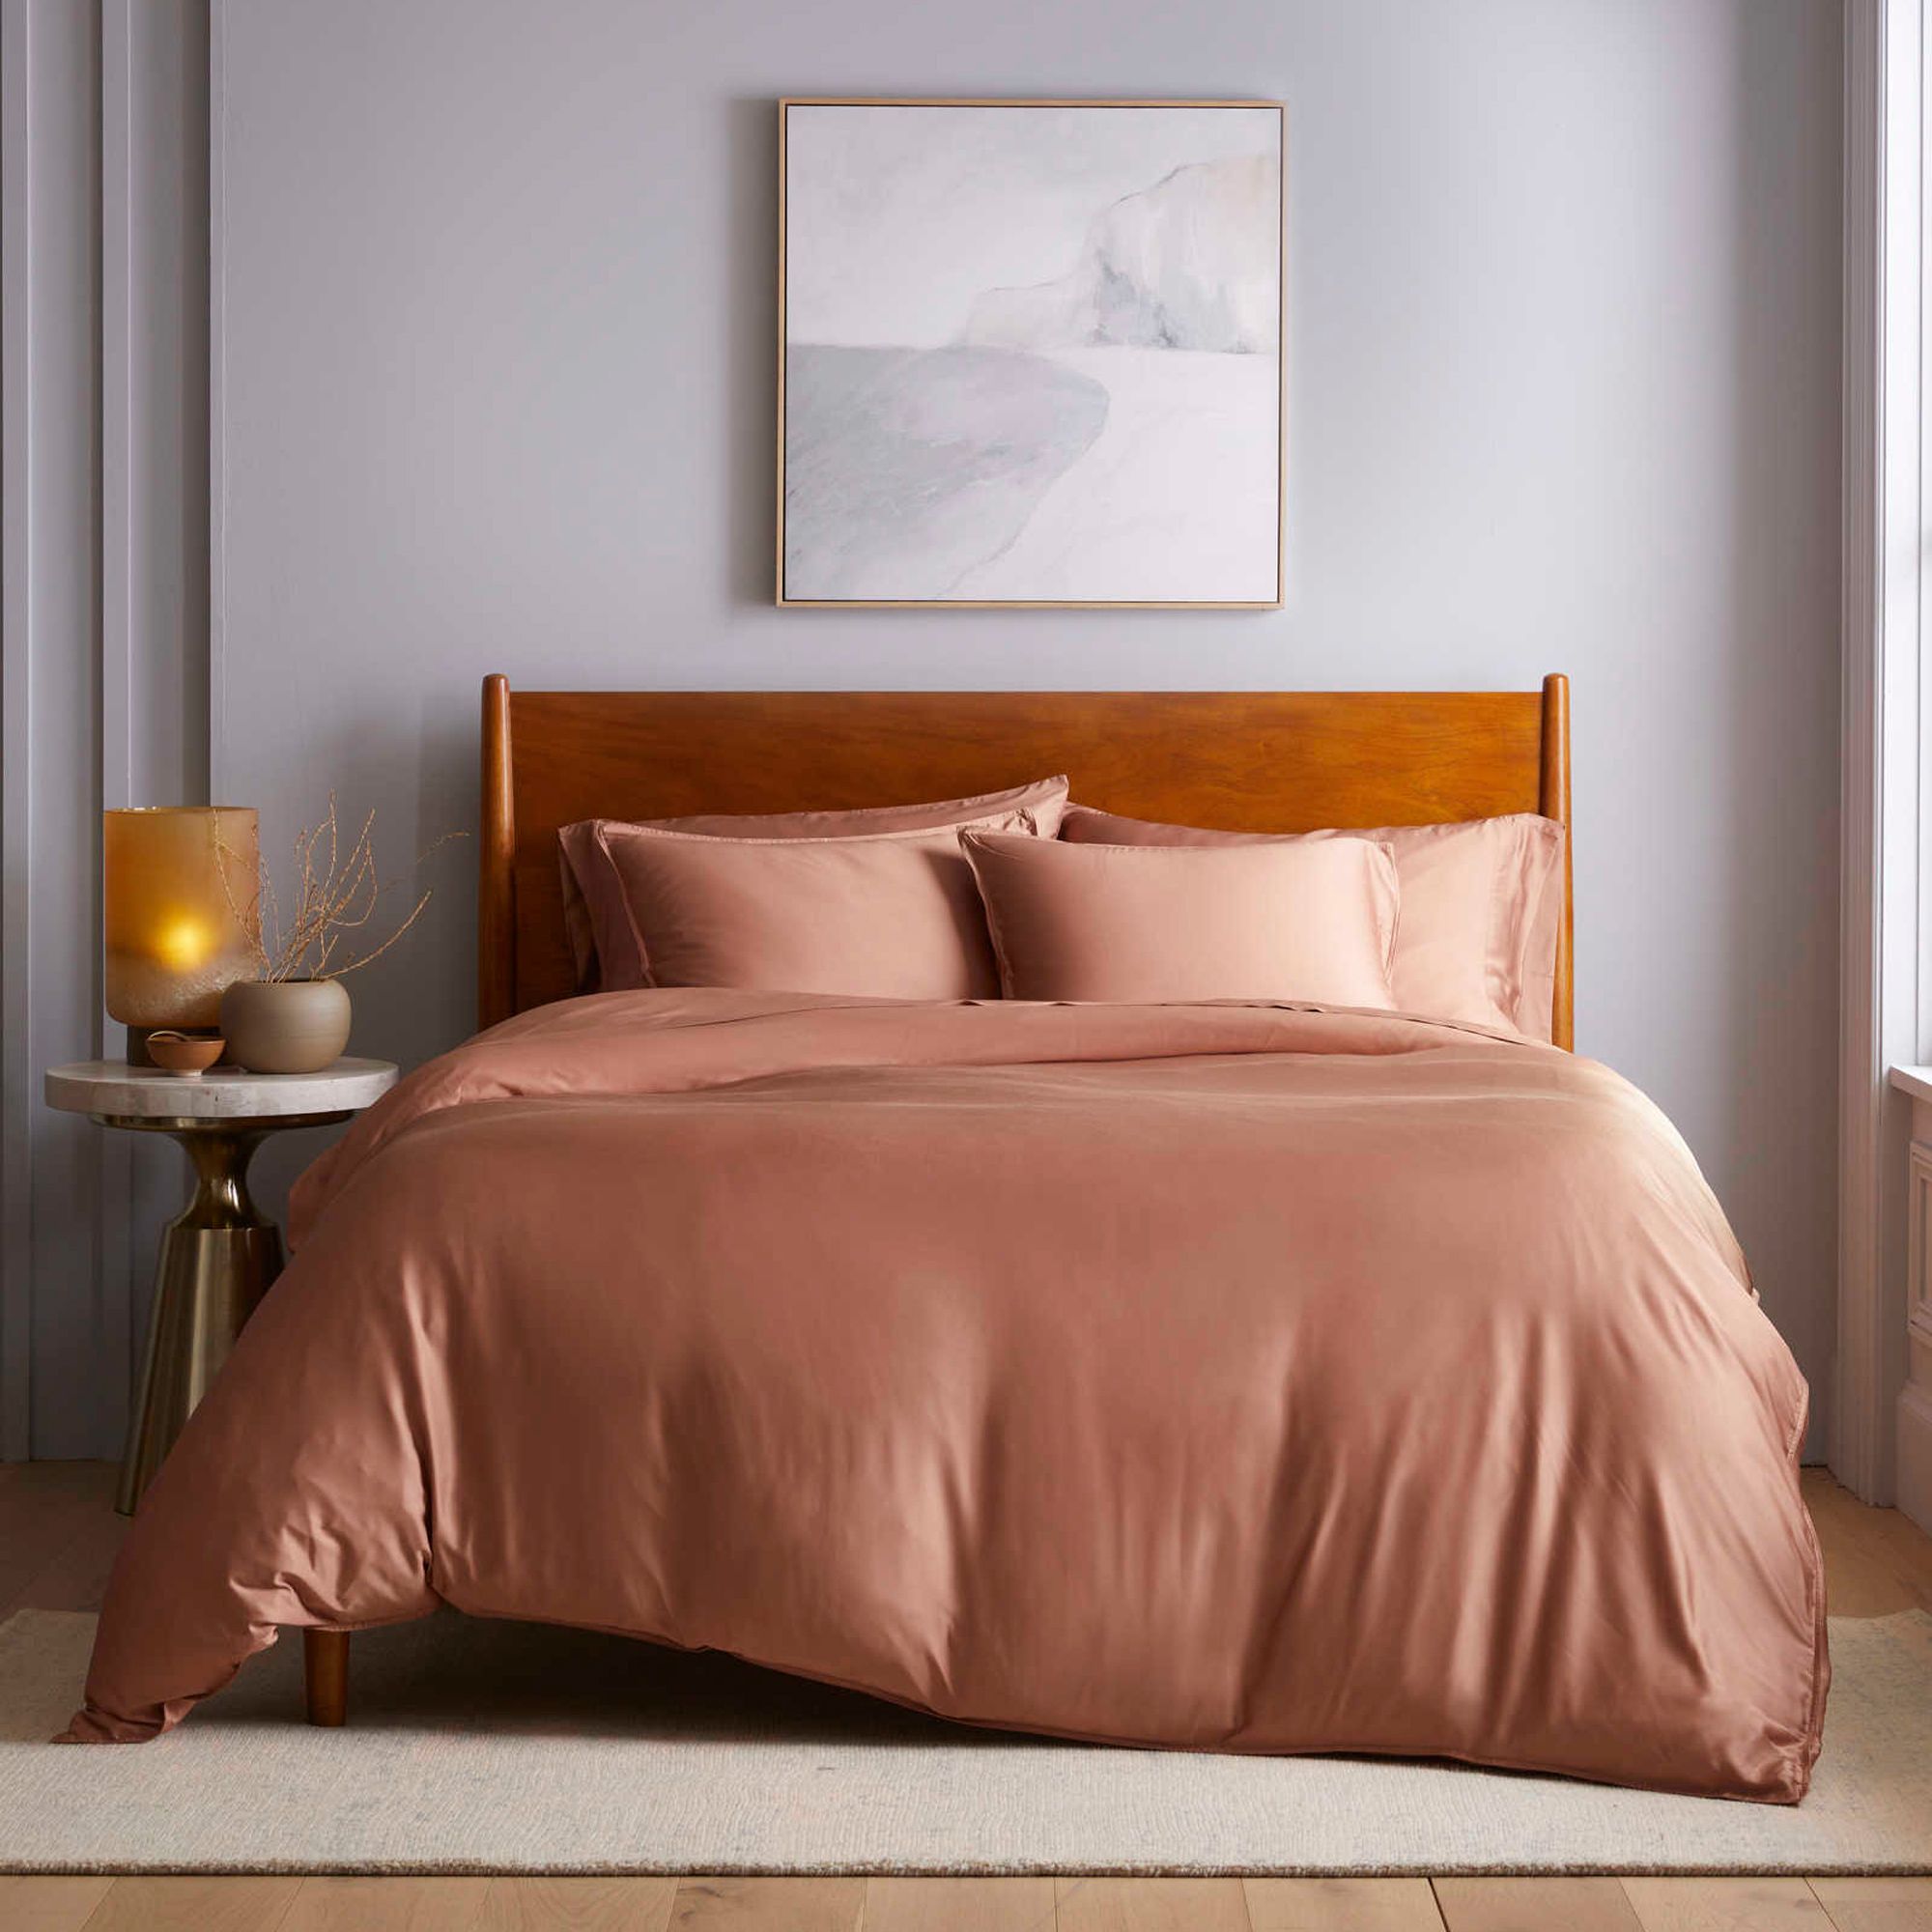 Best Bamboo Sheets for Your Budget and Where to Buy